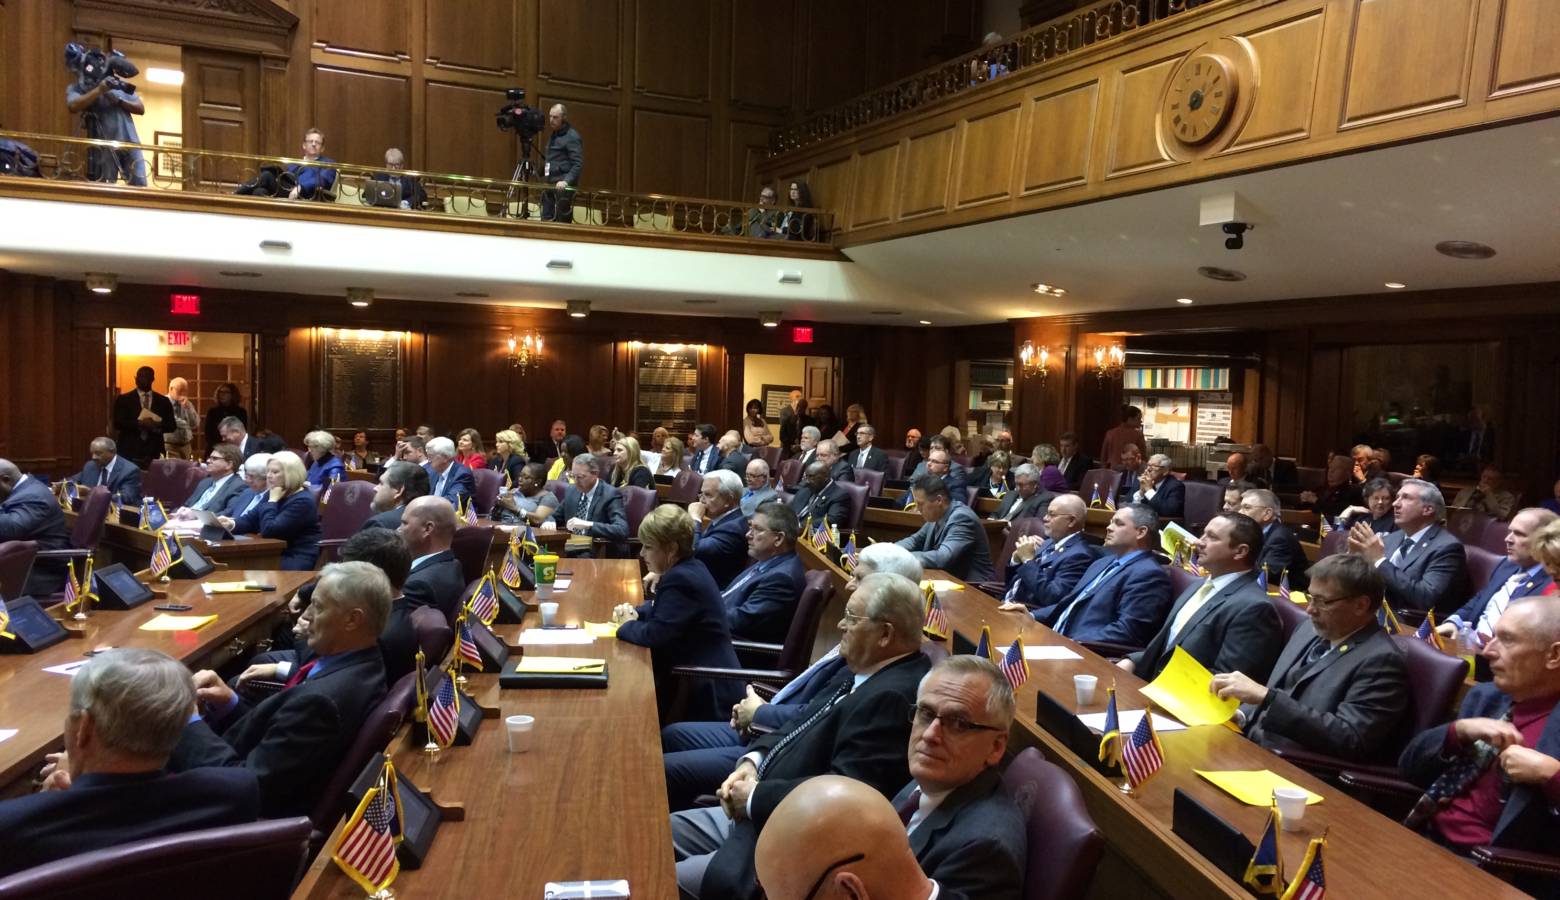 Members of the Indiana House of Representatives convene for Legislative Organizational Day prior to the 2018 session. (Jeanie Lindsay/IPB News)